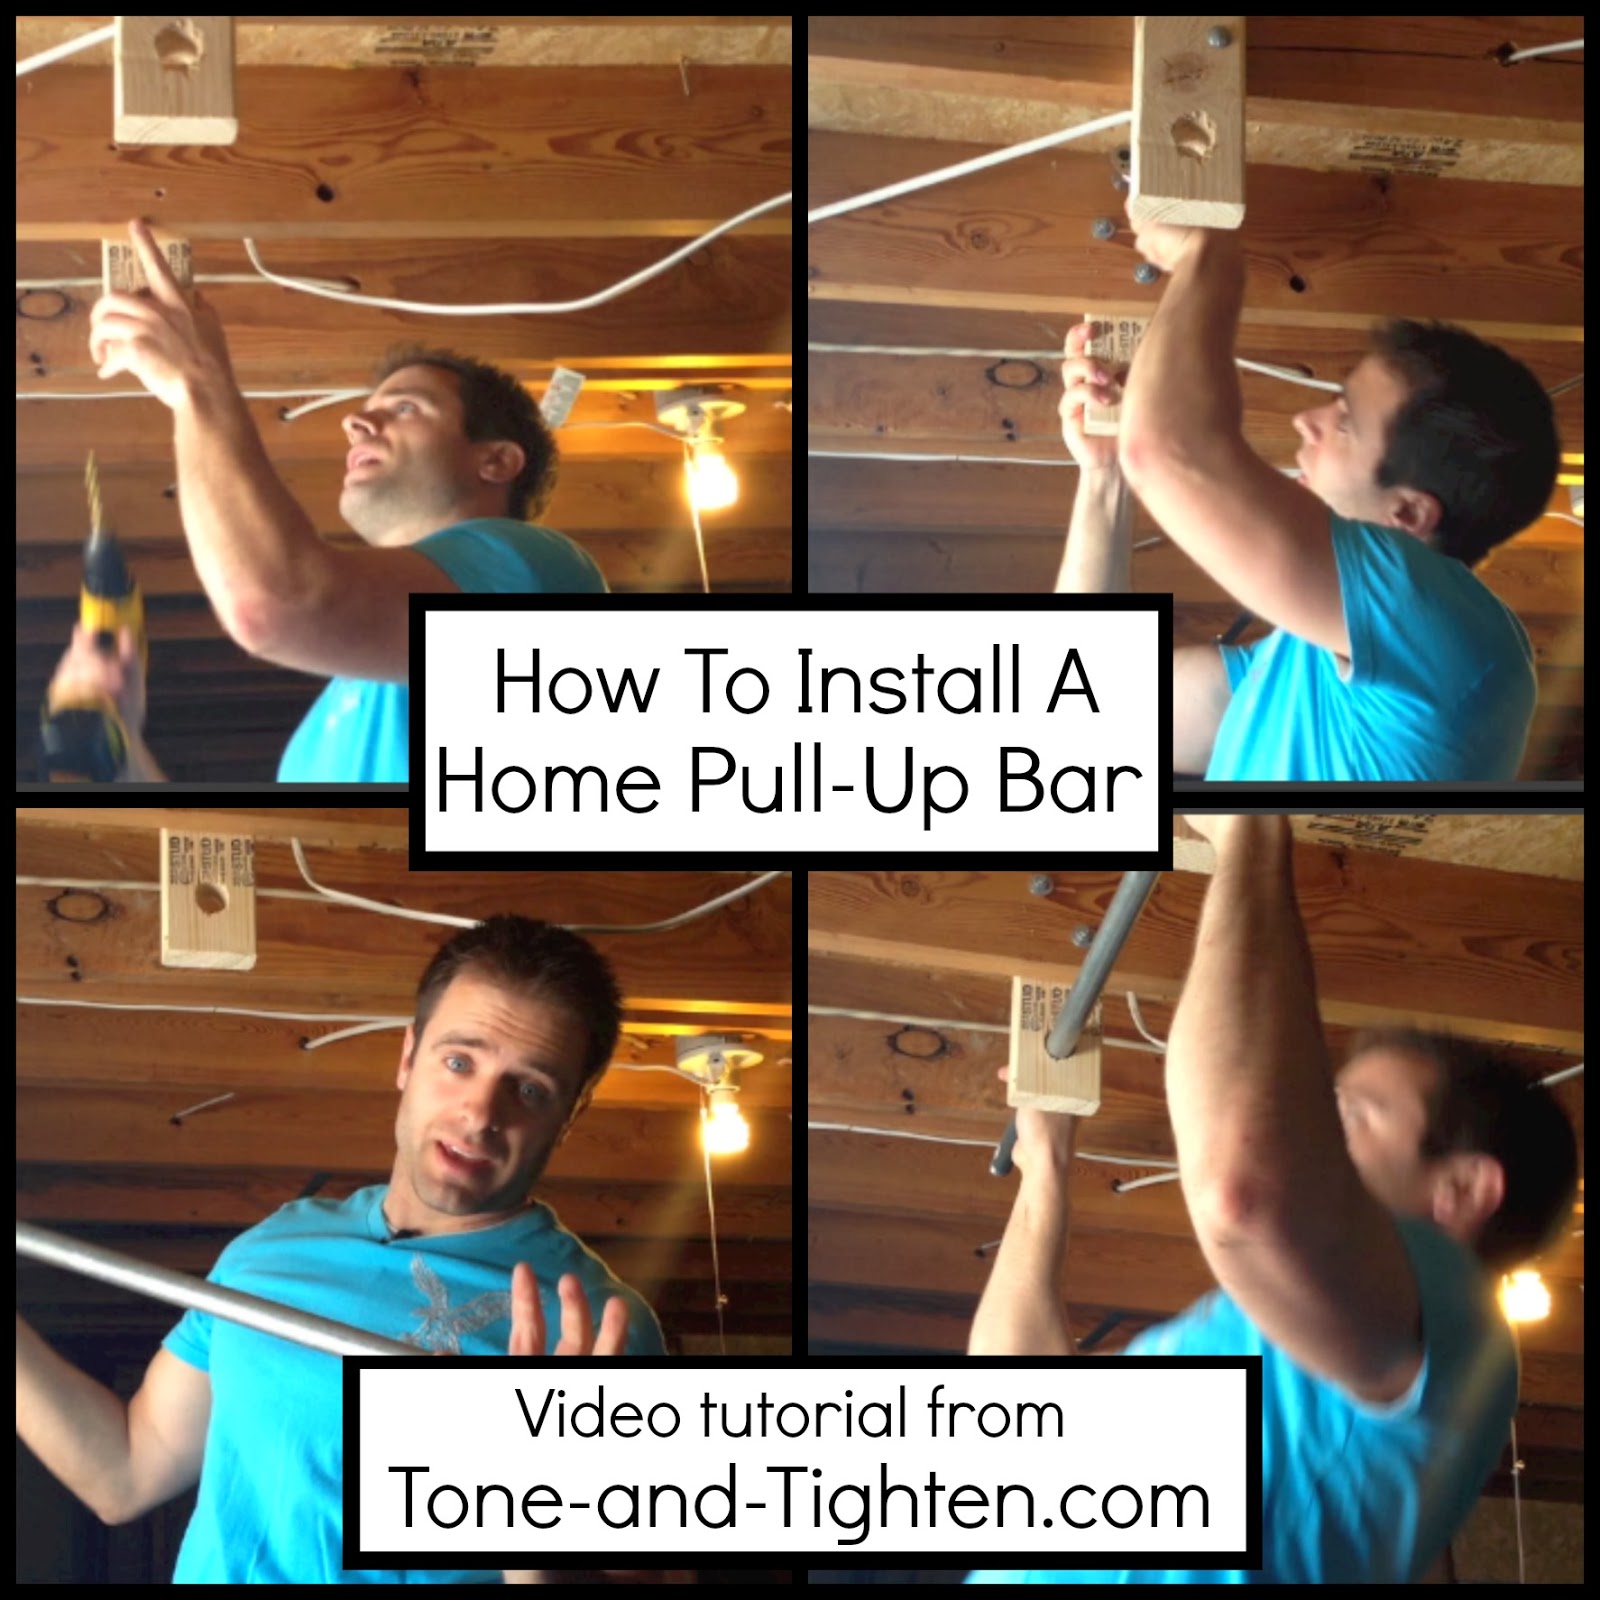 How To Install A Home Pull-Up Bar